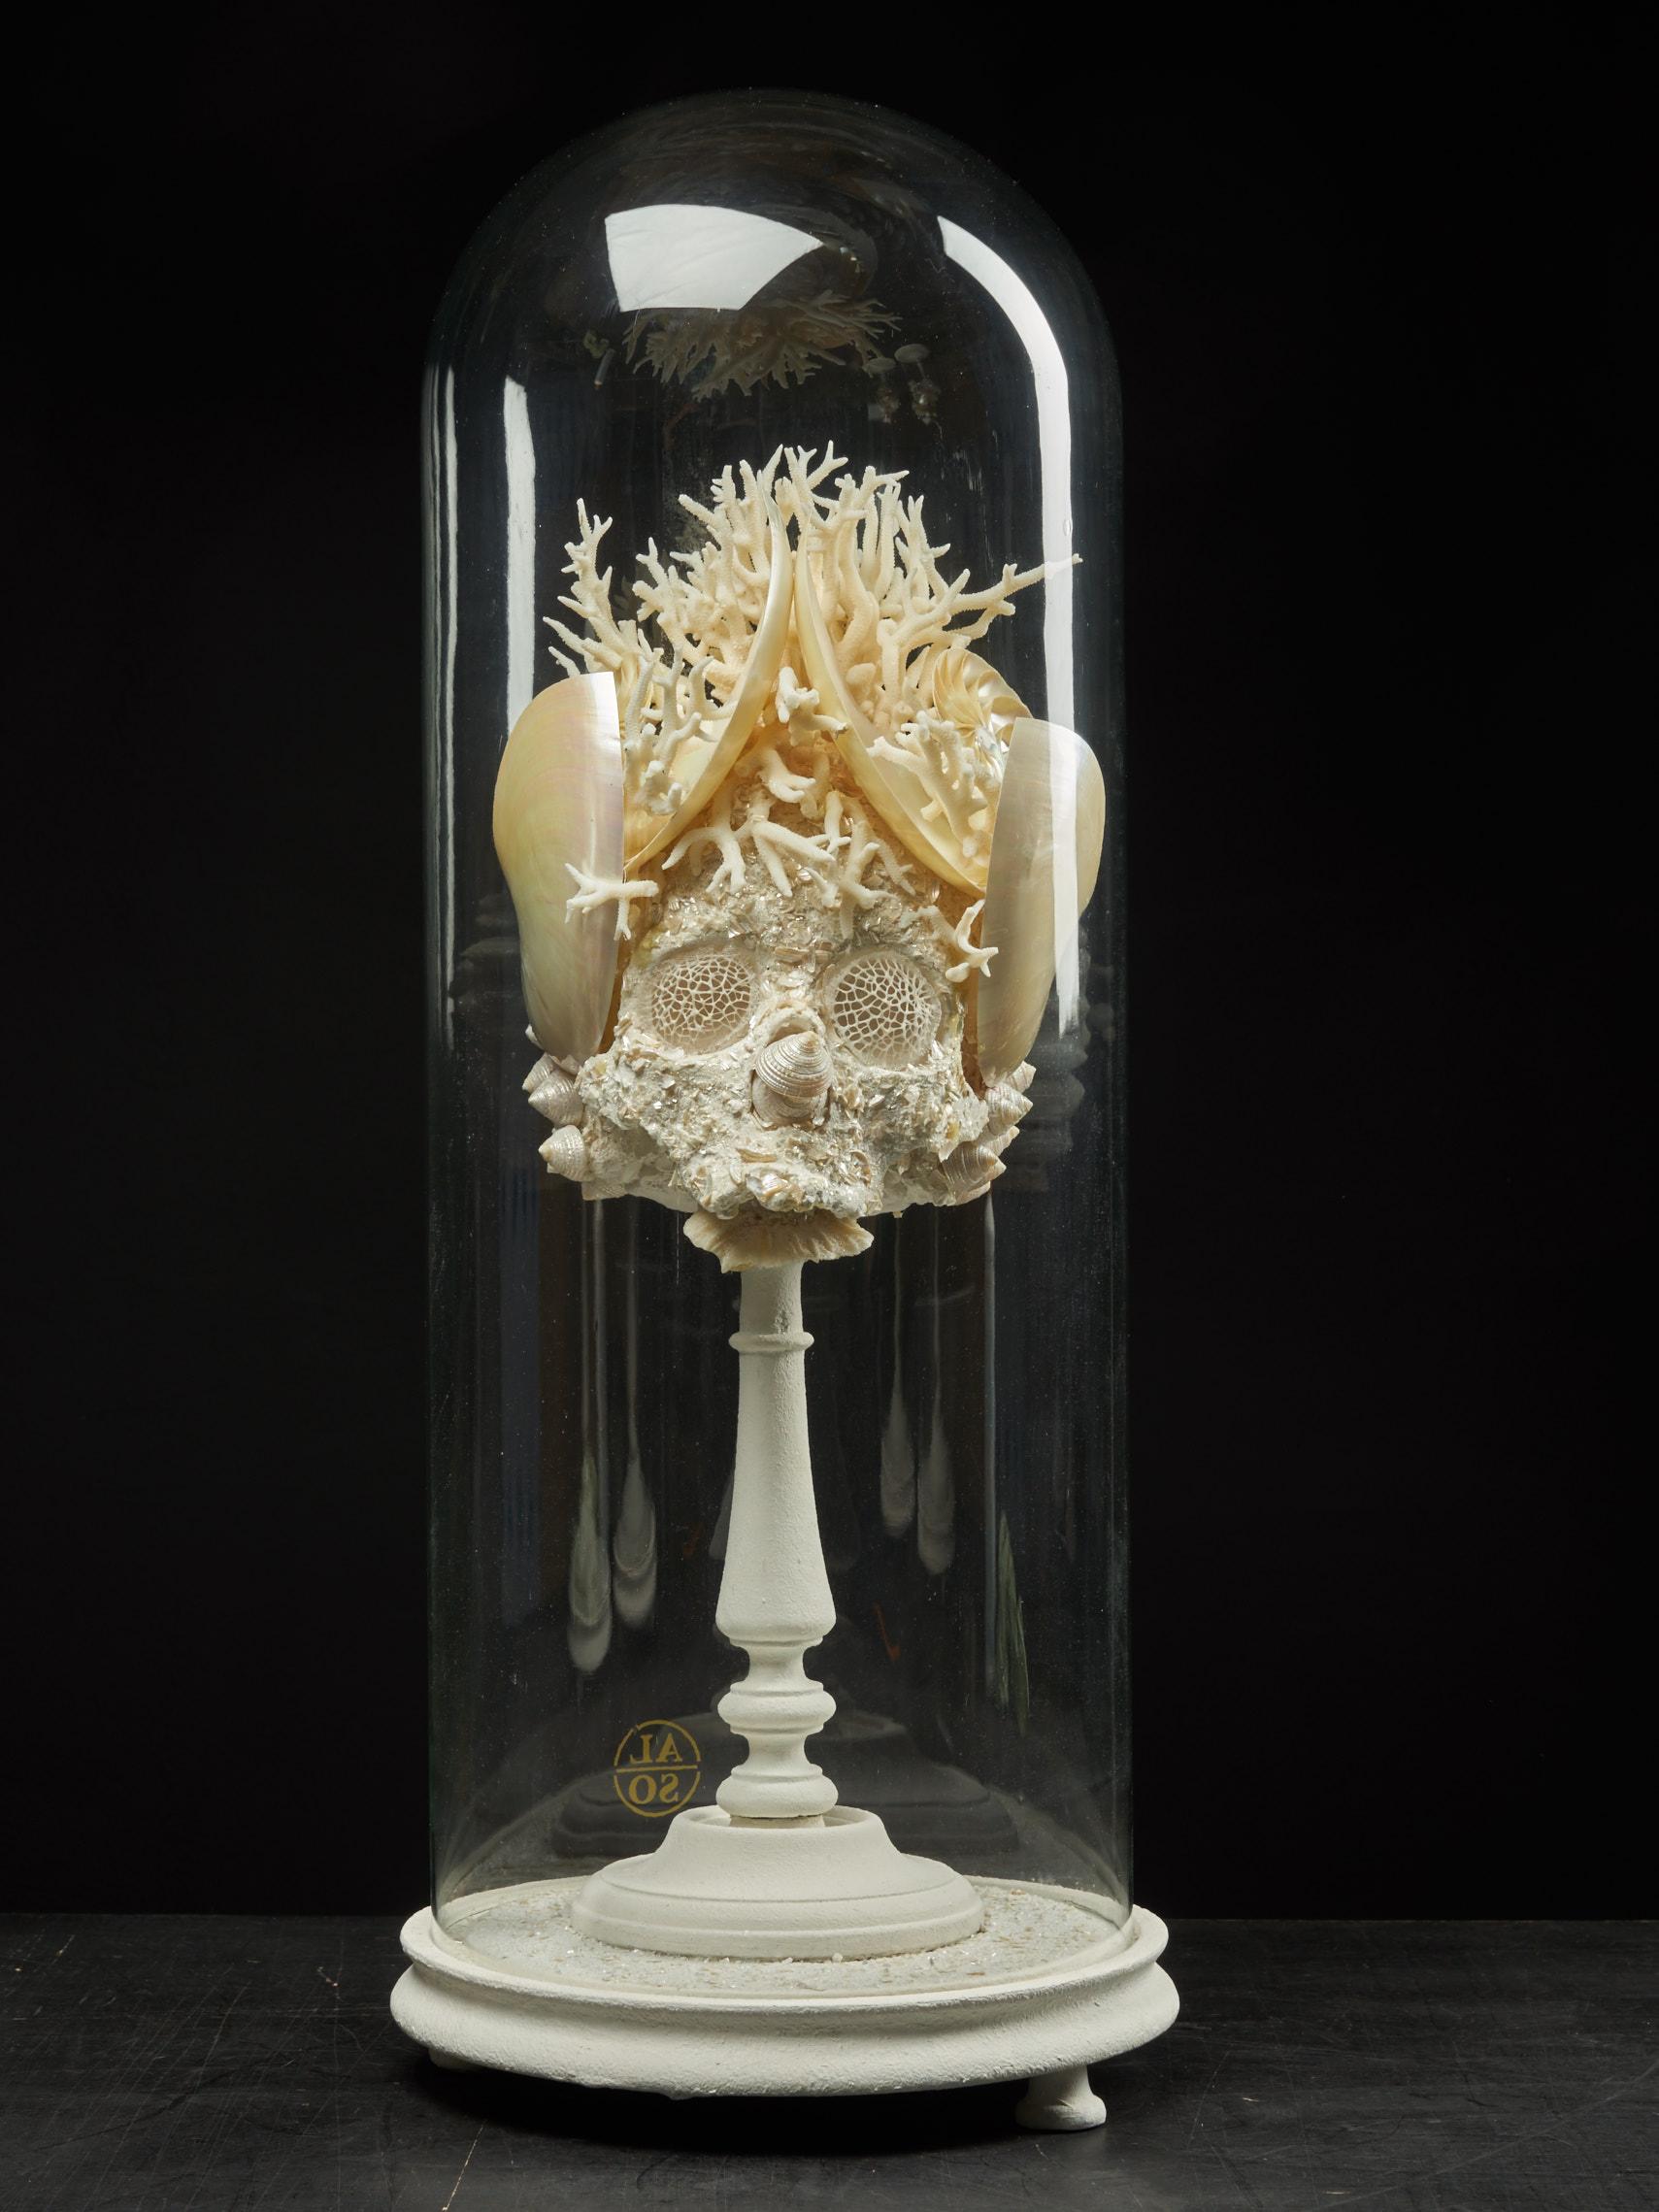 A wonderful composition made out of a variety of white shells and corals. The base of the sculpture is of coral white with the eyes resembling a spider web. The nose is an accumulation of three beige and white pyramid looking shells. Both sides have